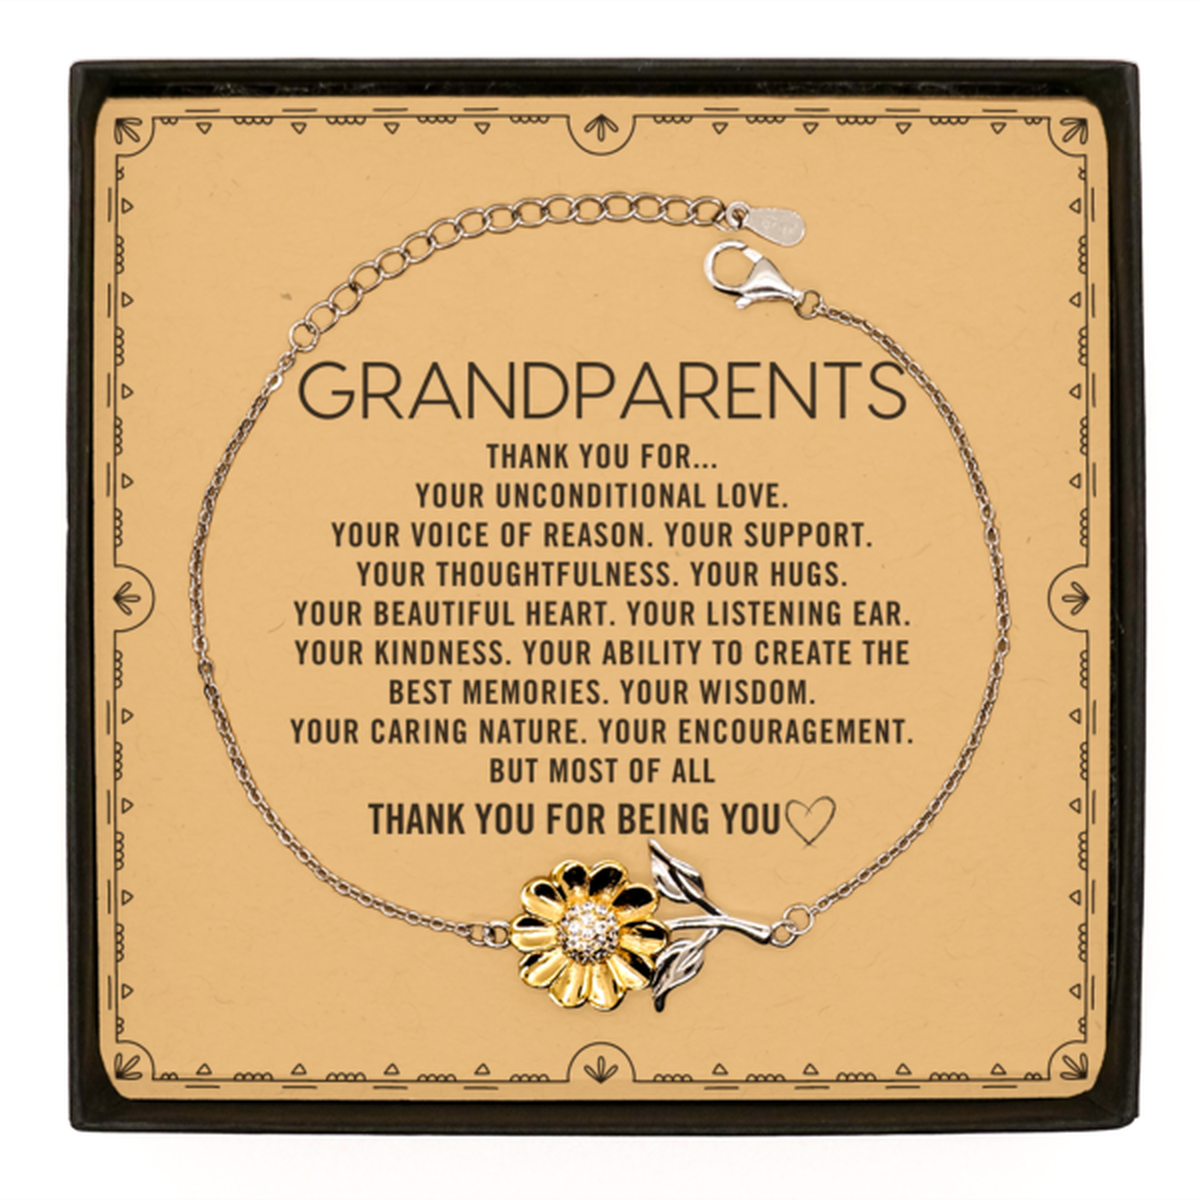 Grandparents Sunflower Bracelet Custom, Message Card Gifts For Grandparents Christmas Graduation Birthday Gifts for Men Women Grandparents Thank you for Your unconditional love